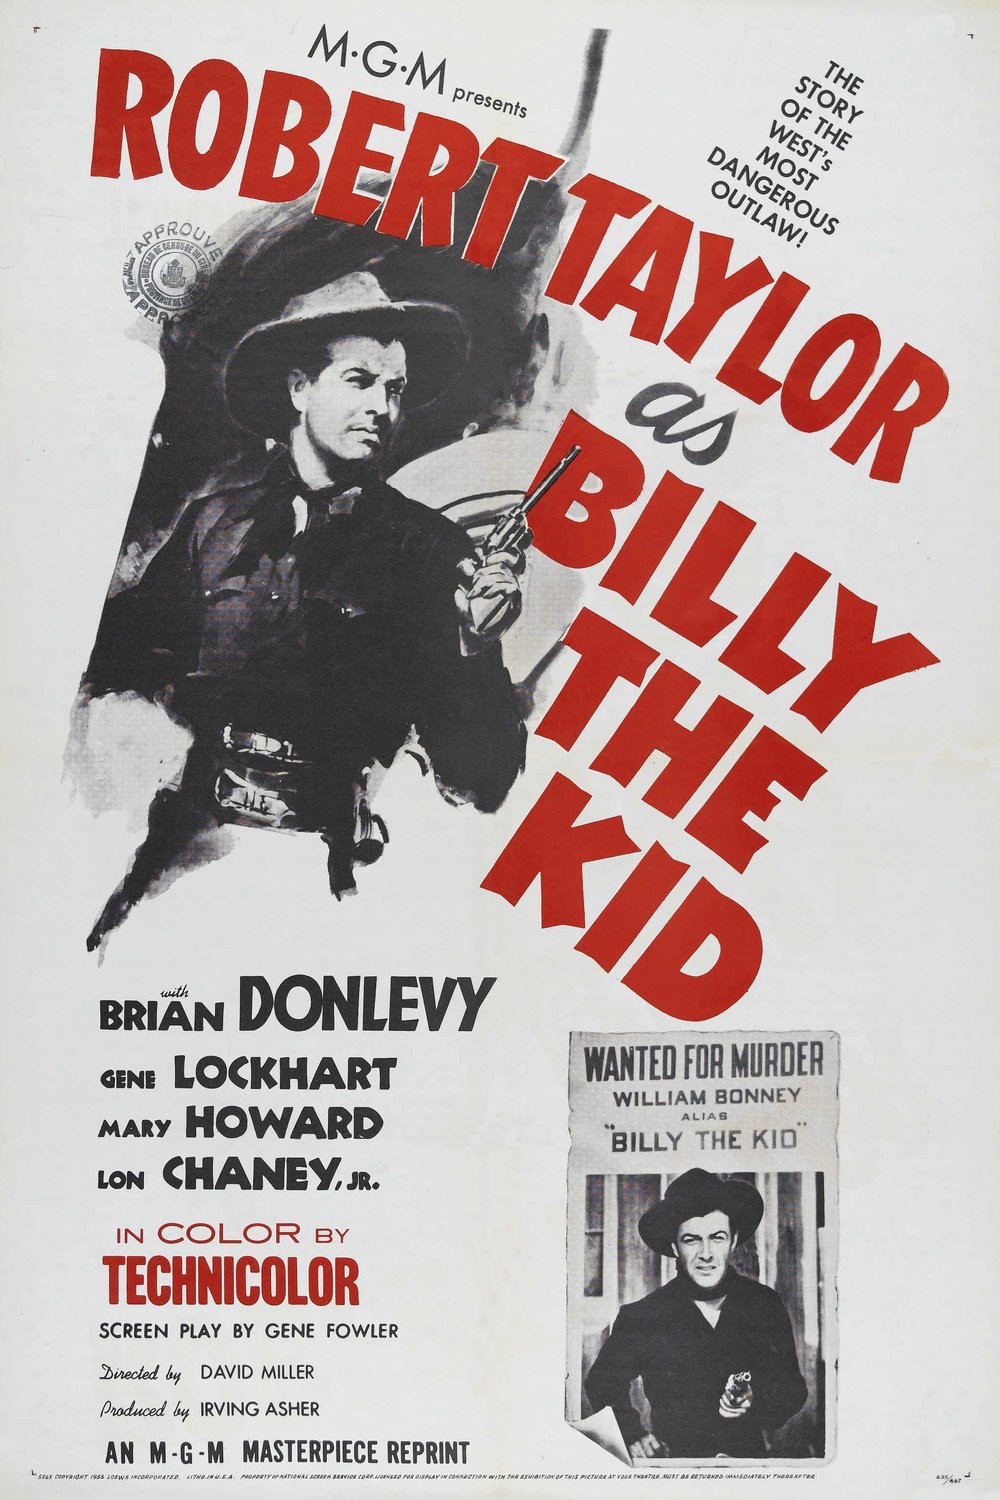 Poster of the movie Billy the Kid